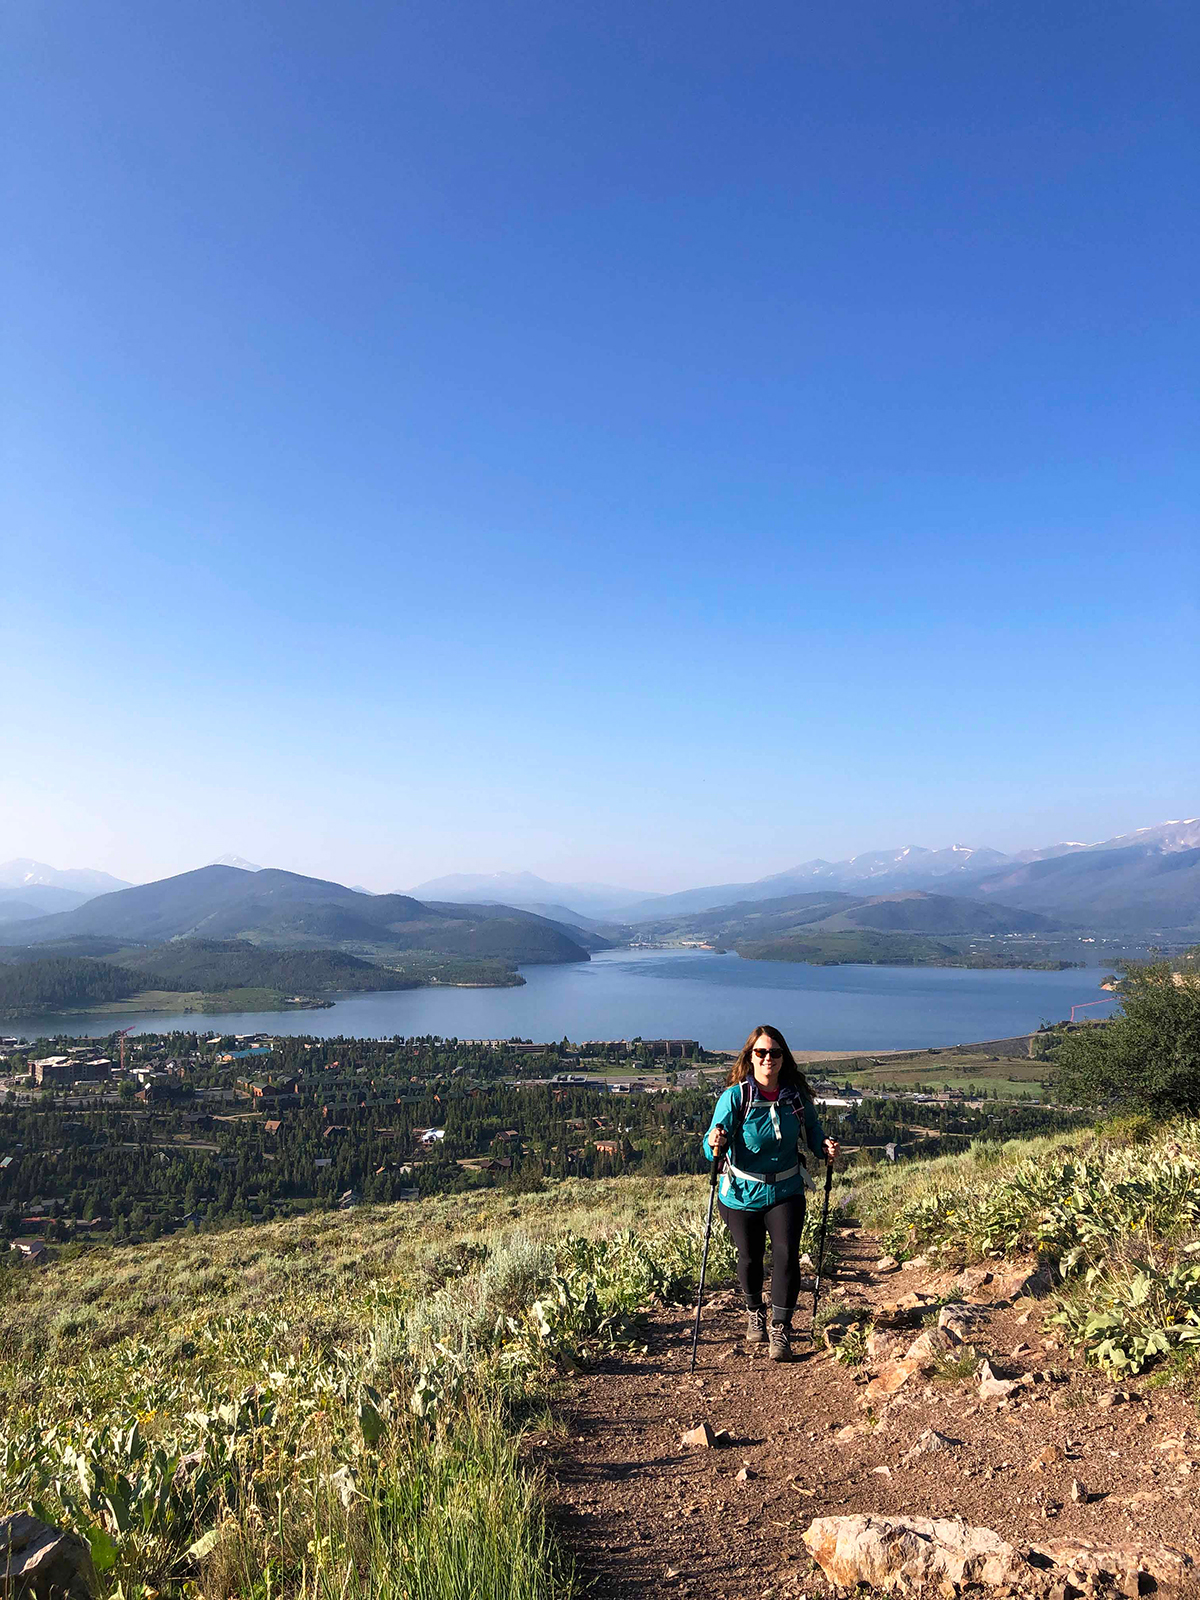 woman on hiking trail in Colorado with lake and mountains in background